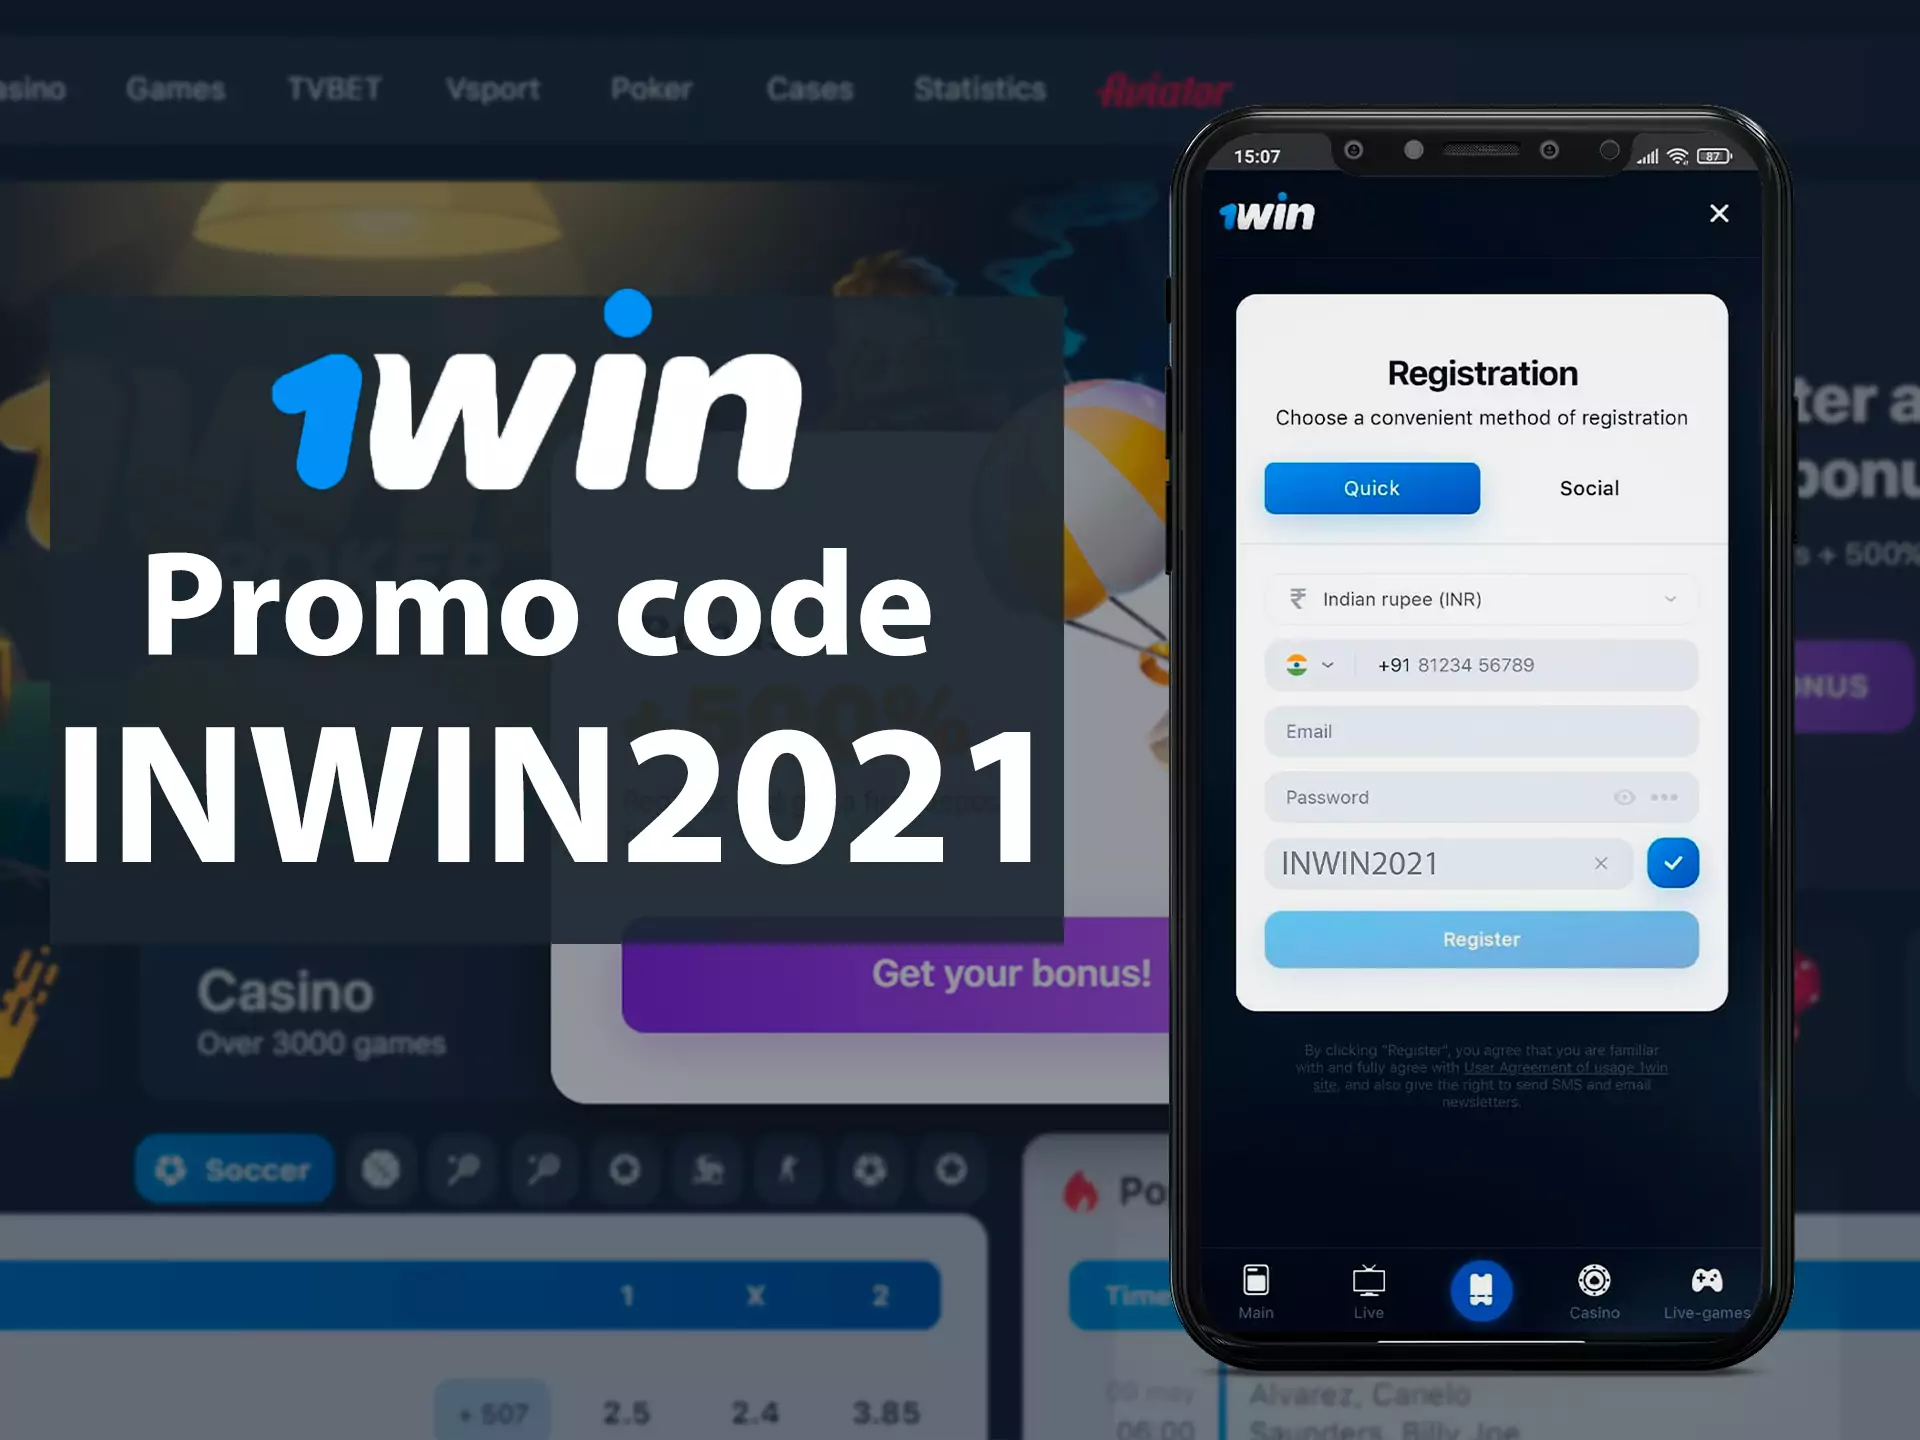 You can get up to 75,000 INR withe INWIN2021 promo code in 1win app.